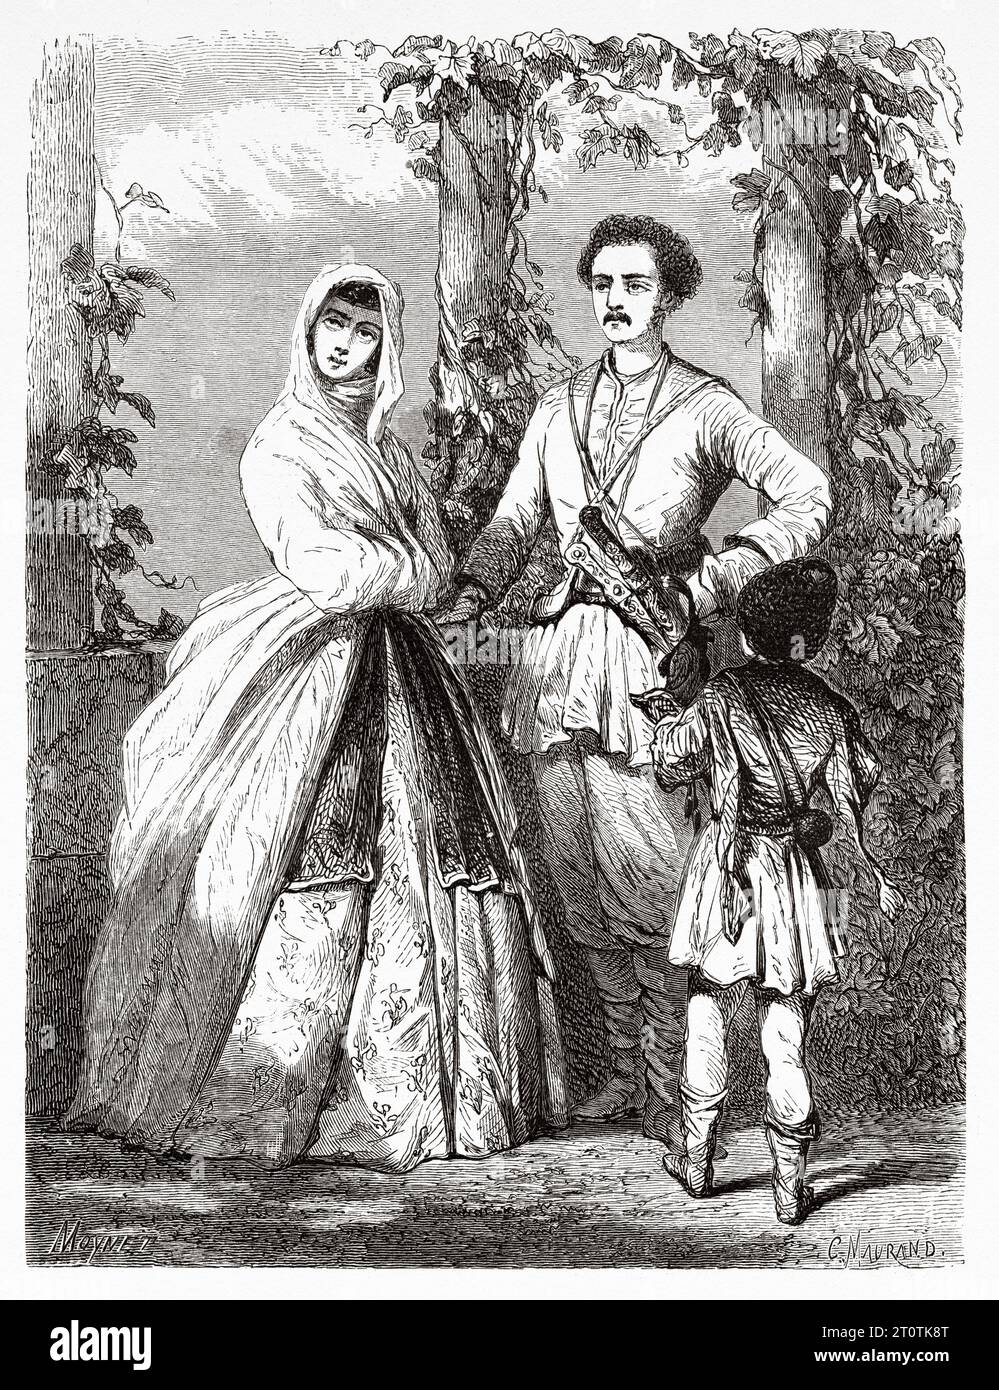 Georgian costumes, Georgia. Voyage to the Black Sea and the Caspian Sea in 1858 by Moynet. Old 19th century engraving from Le Tour du Monde 1860 Stock Photo